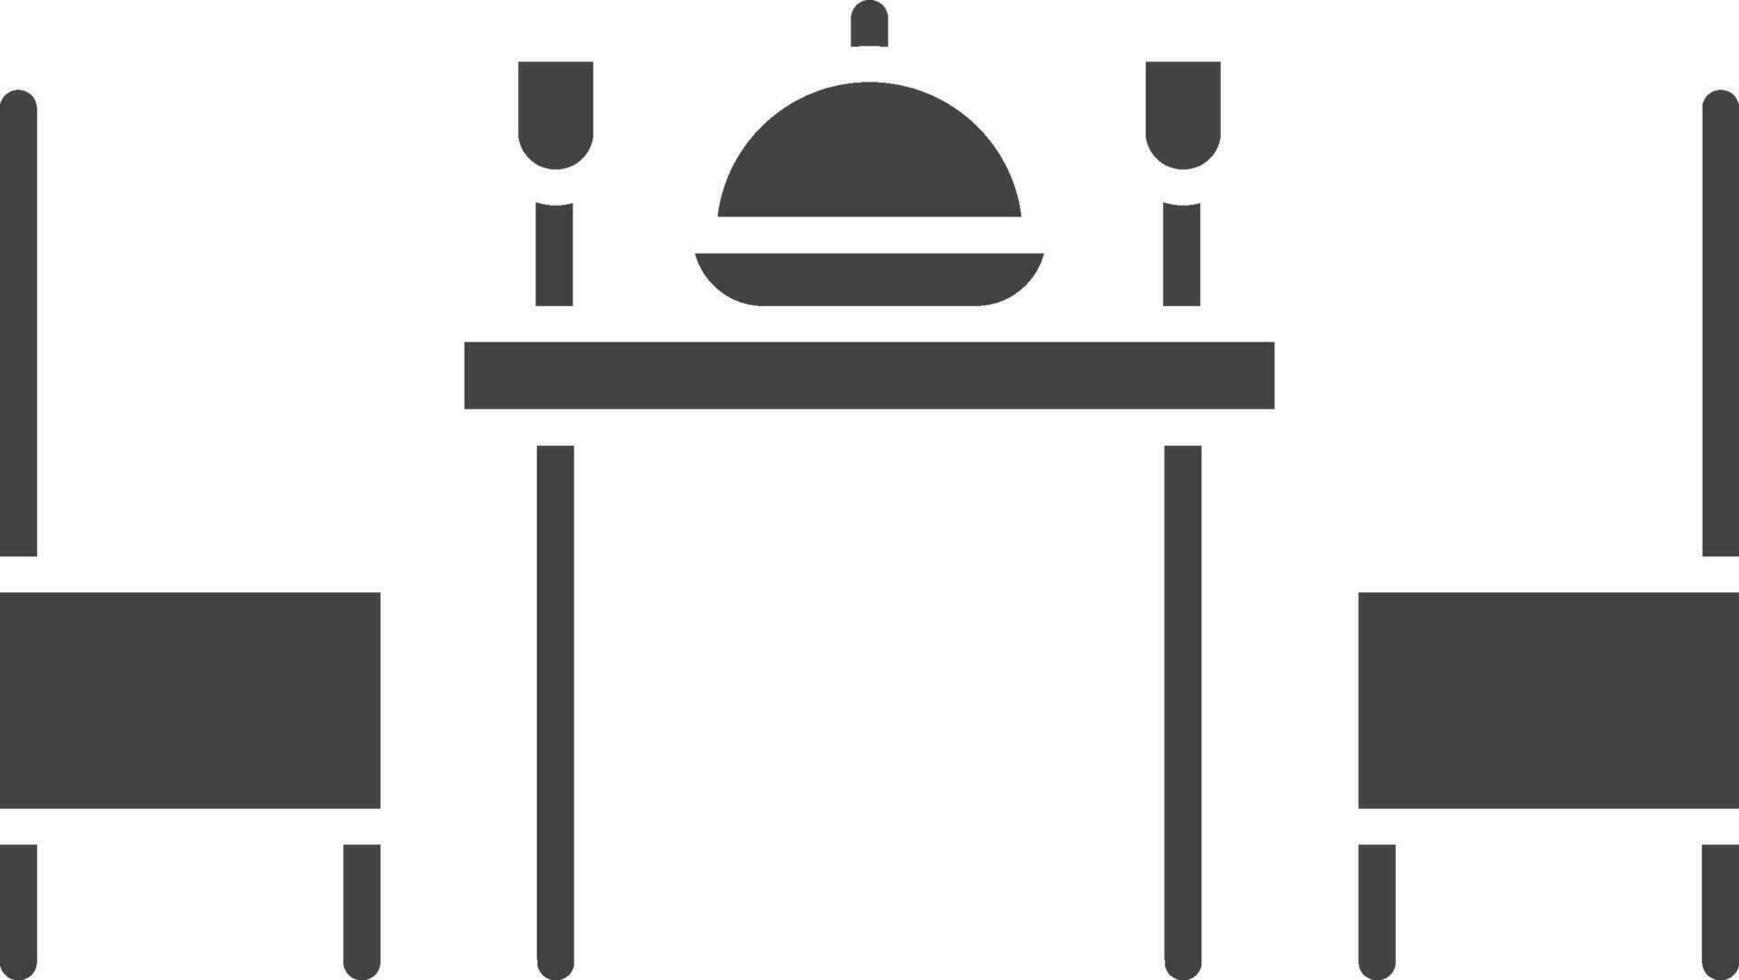 Dinner icon vector image. Suitable for mobile apps, web apps and print media.